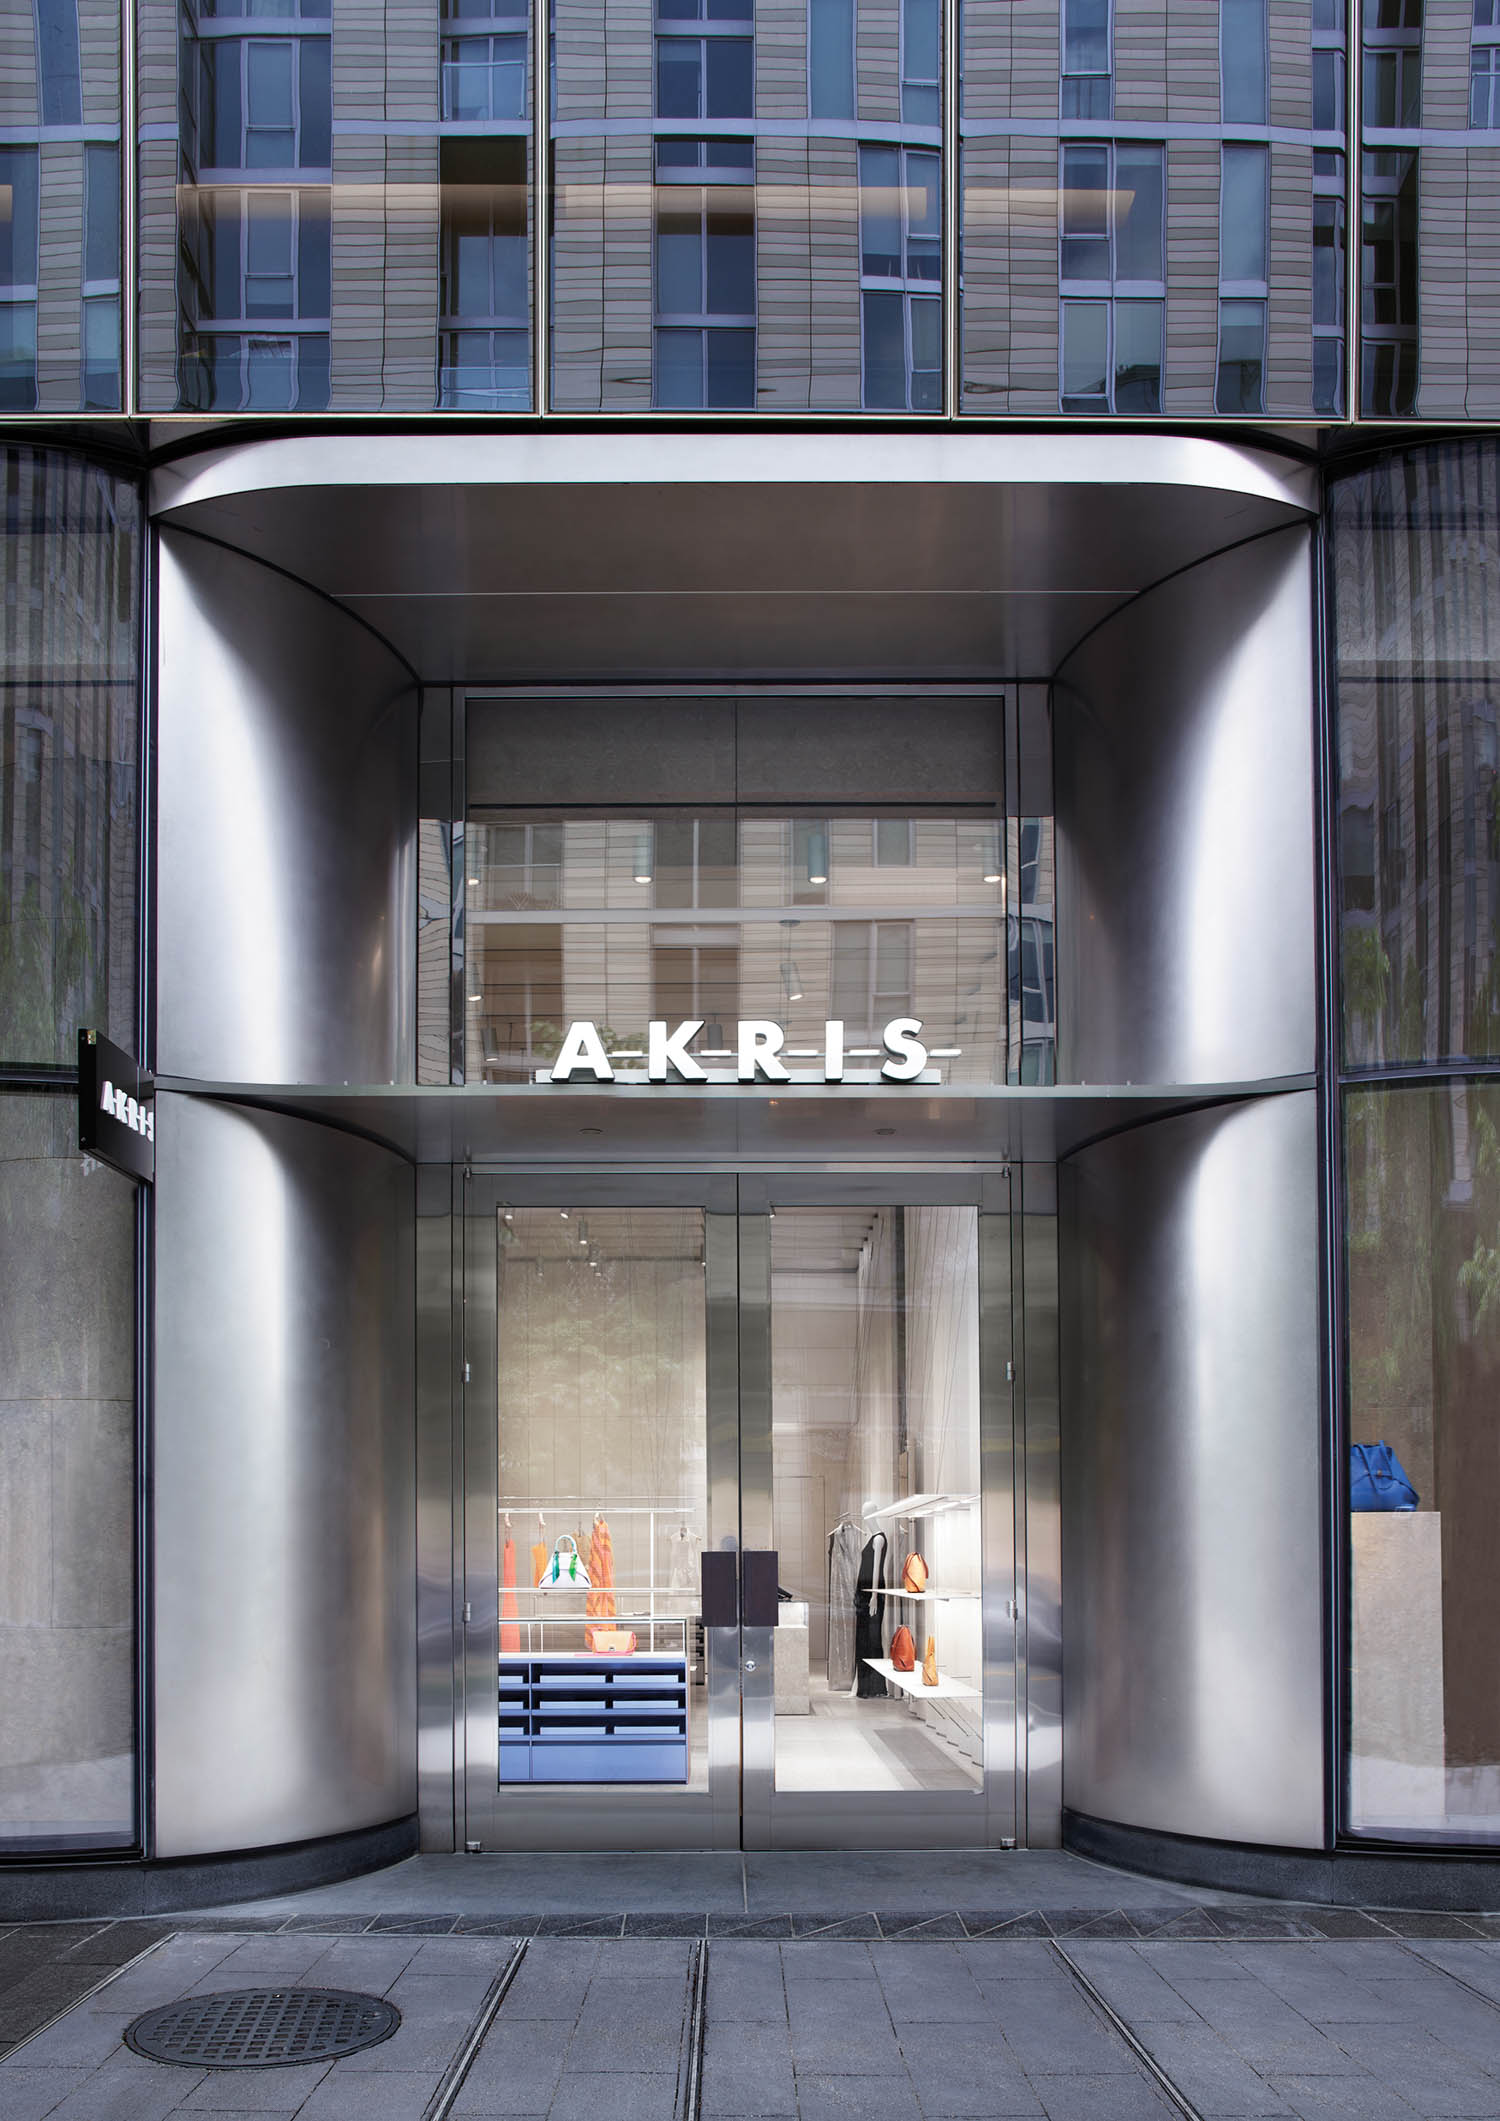 The entry to the Akris store in Washington by David Chipperfield Architects